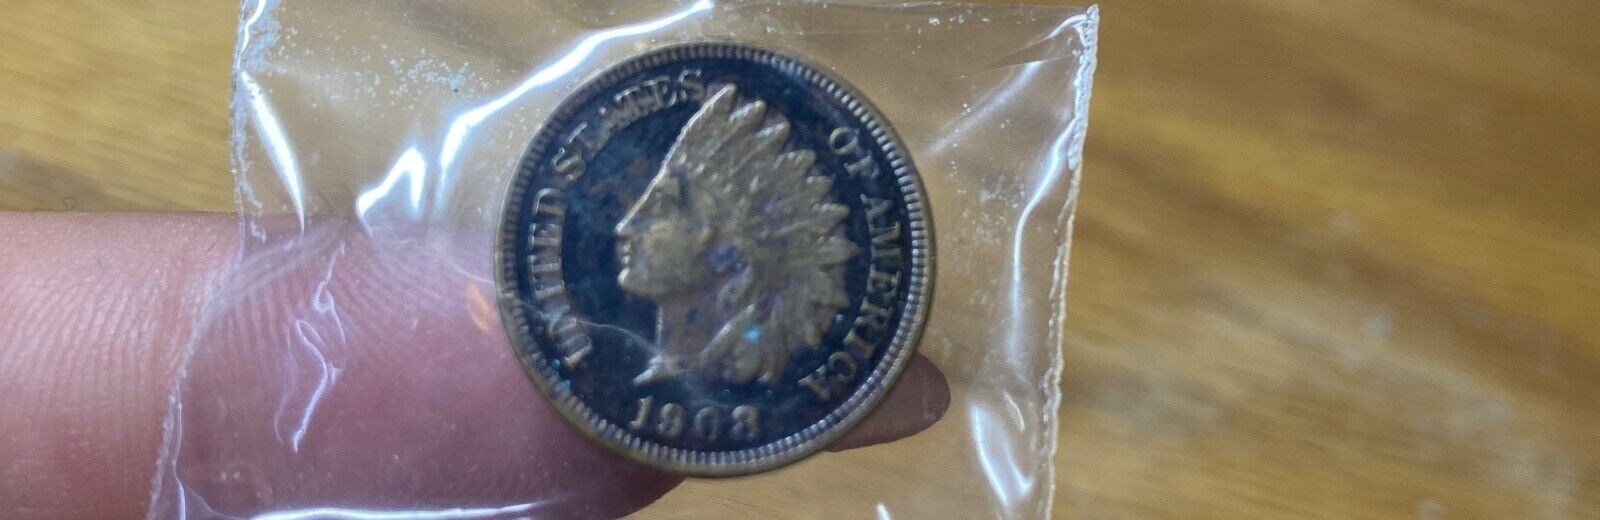 1908 Indian Head Penny Button United States Handmade Currency Button Vintage